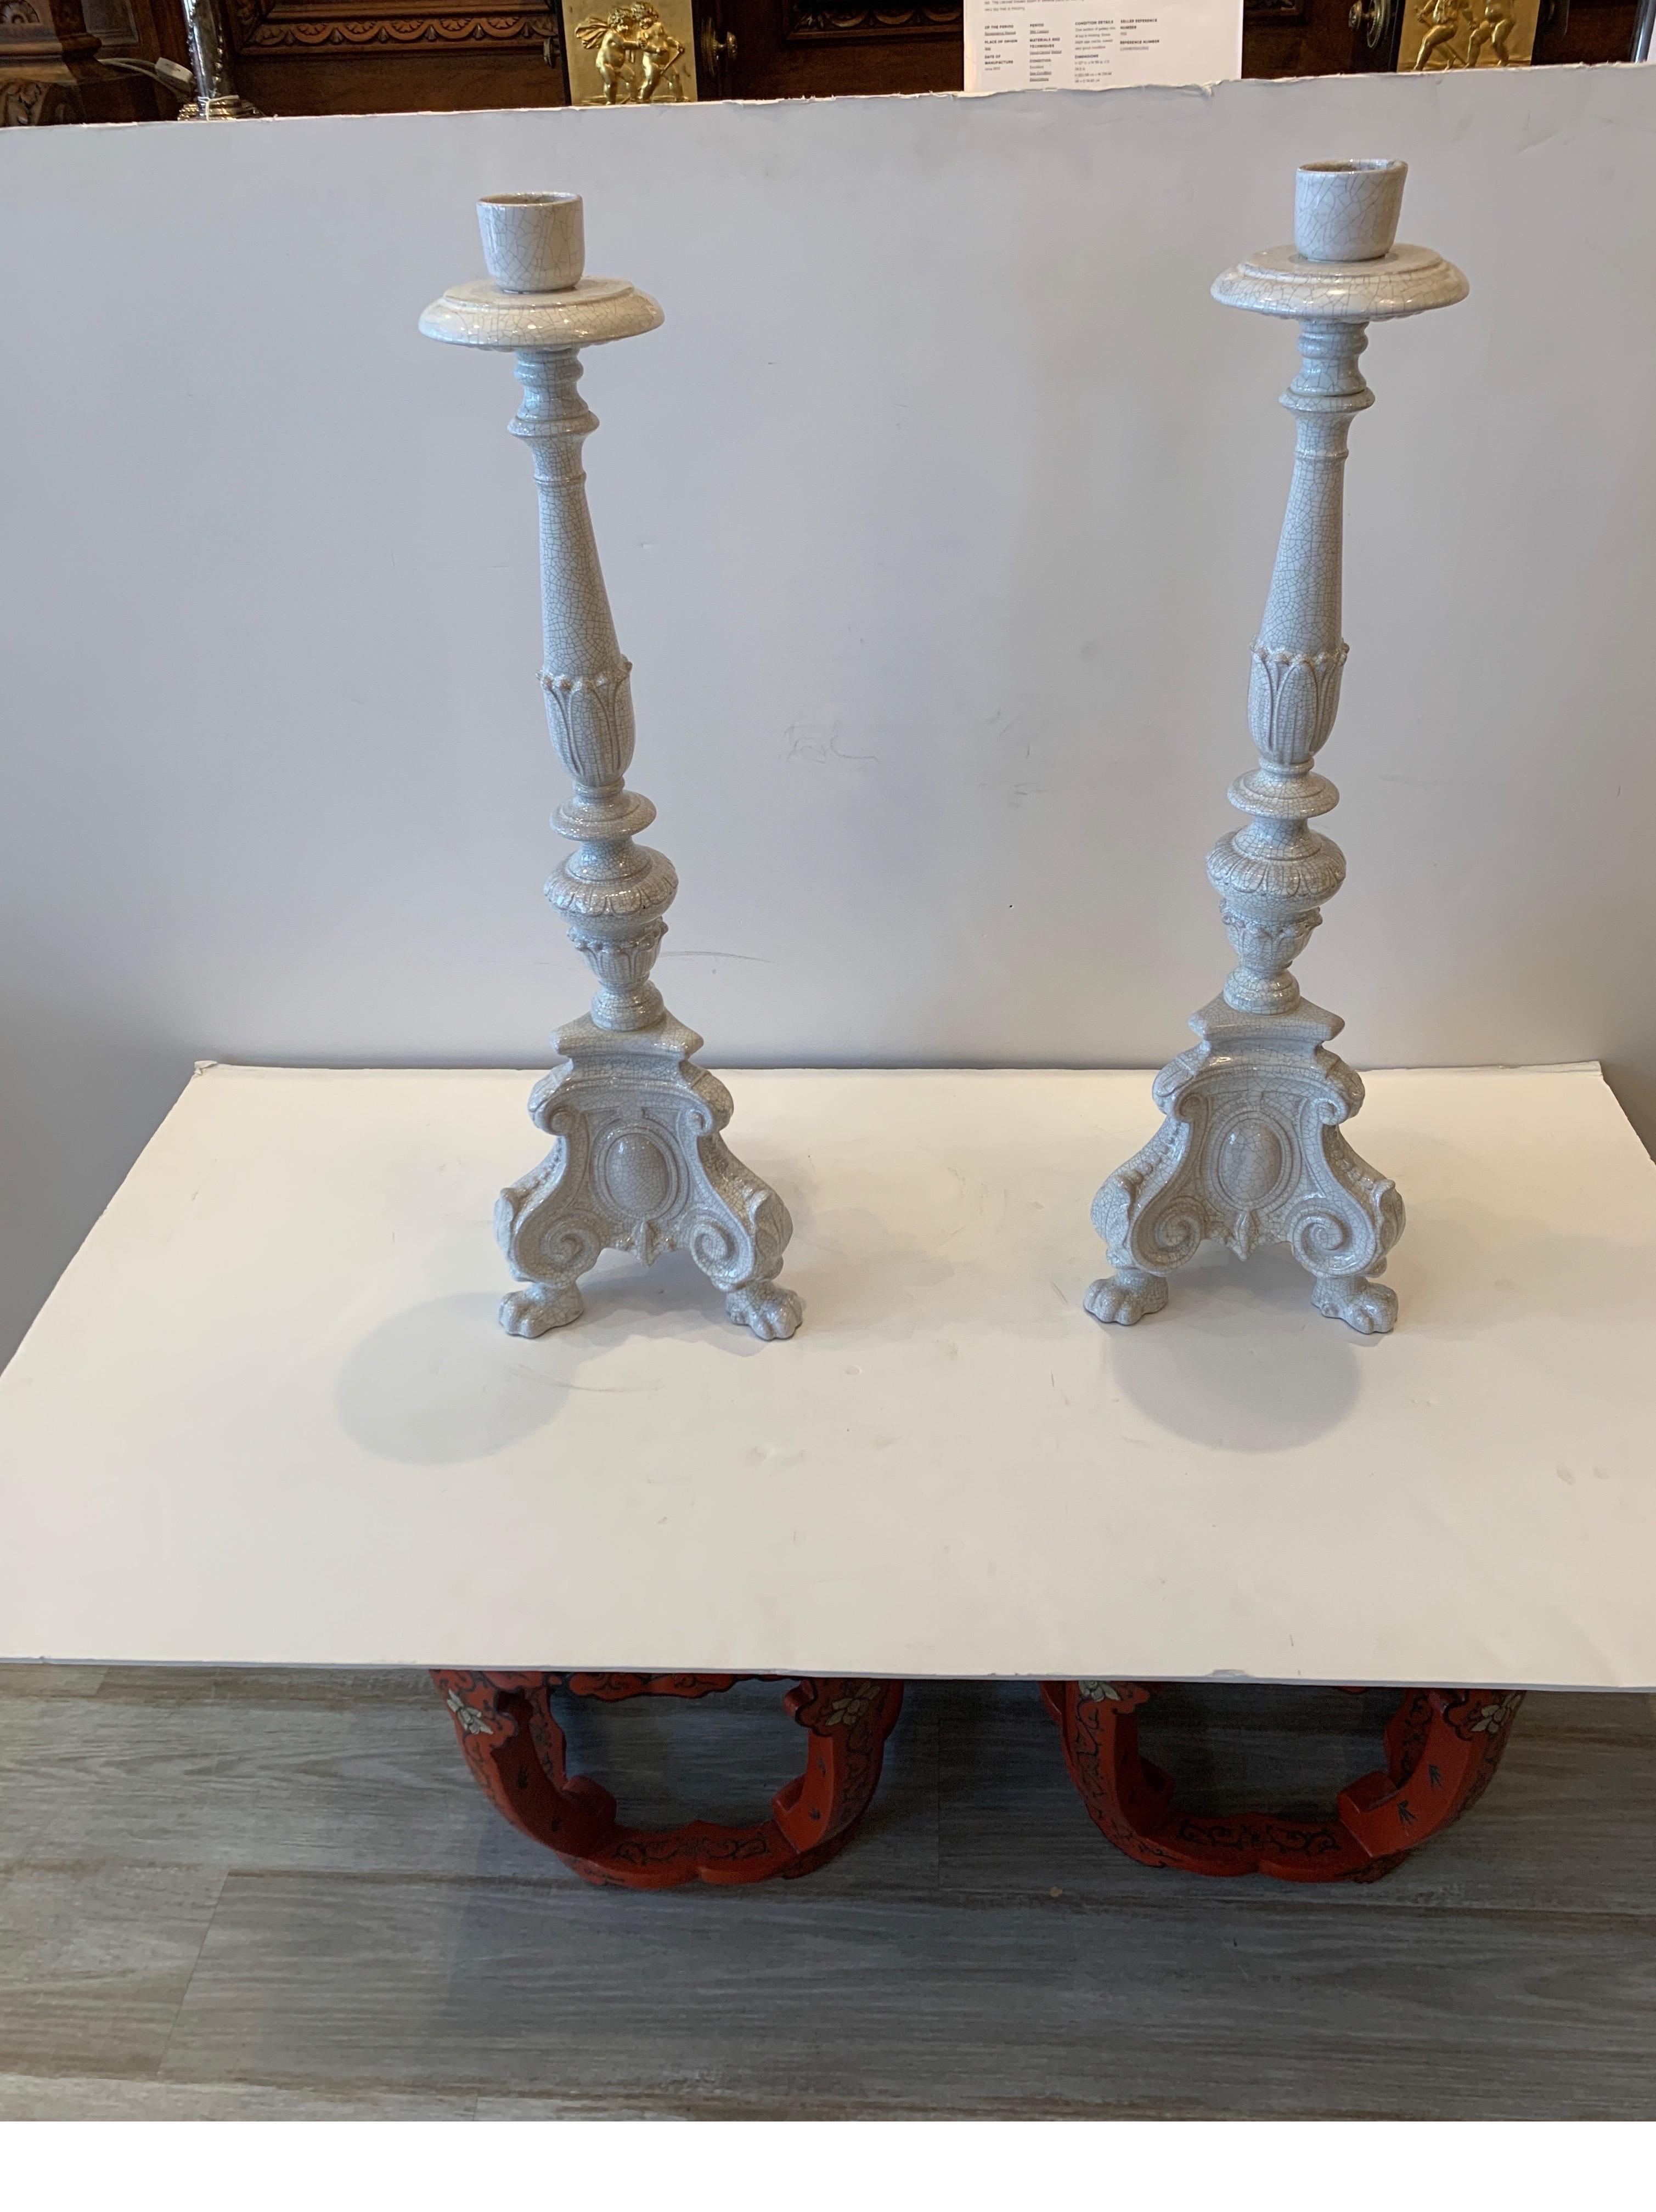 A pair of very chic Blanc-de-chine glazed tall candlesticks/ circa 1930s with a off white tin glaze with crackle finish over earthenware. 30 inches tall.